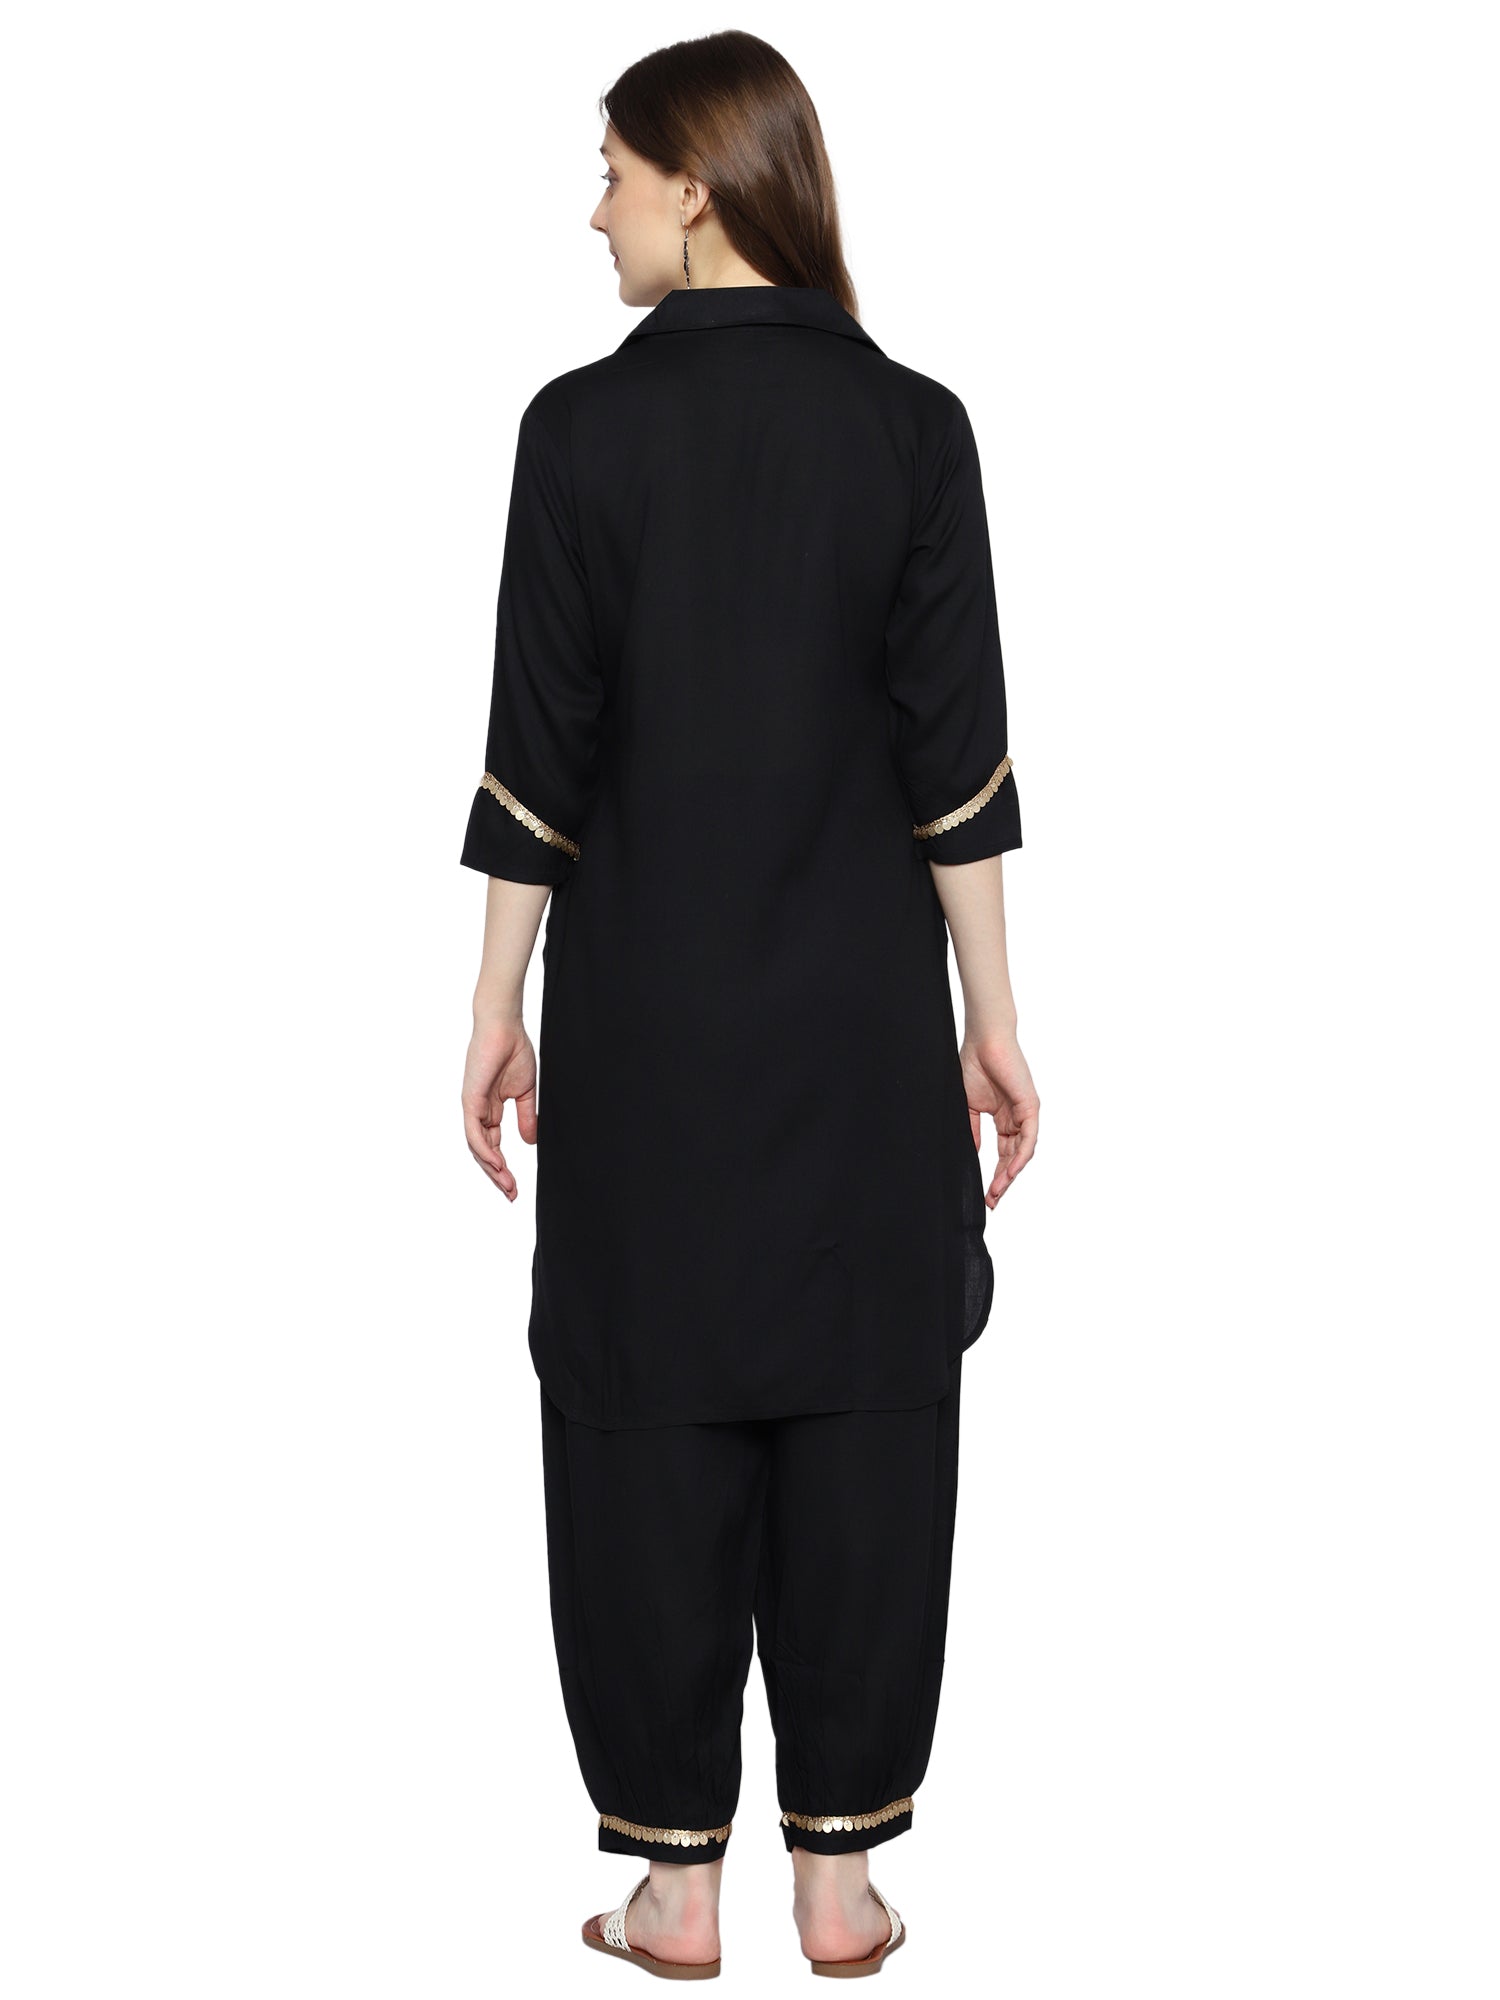 Plus Size Black Rayon Co-ord Set with Coller  and Pockets